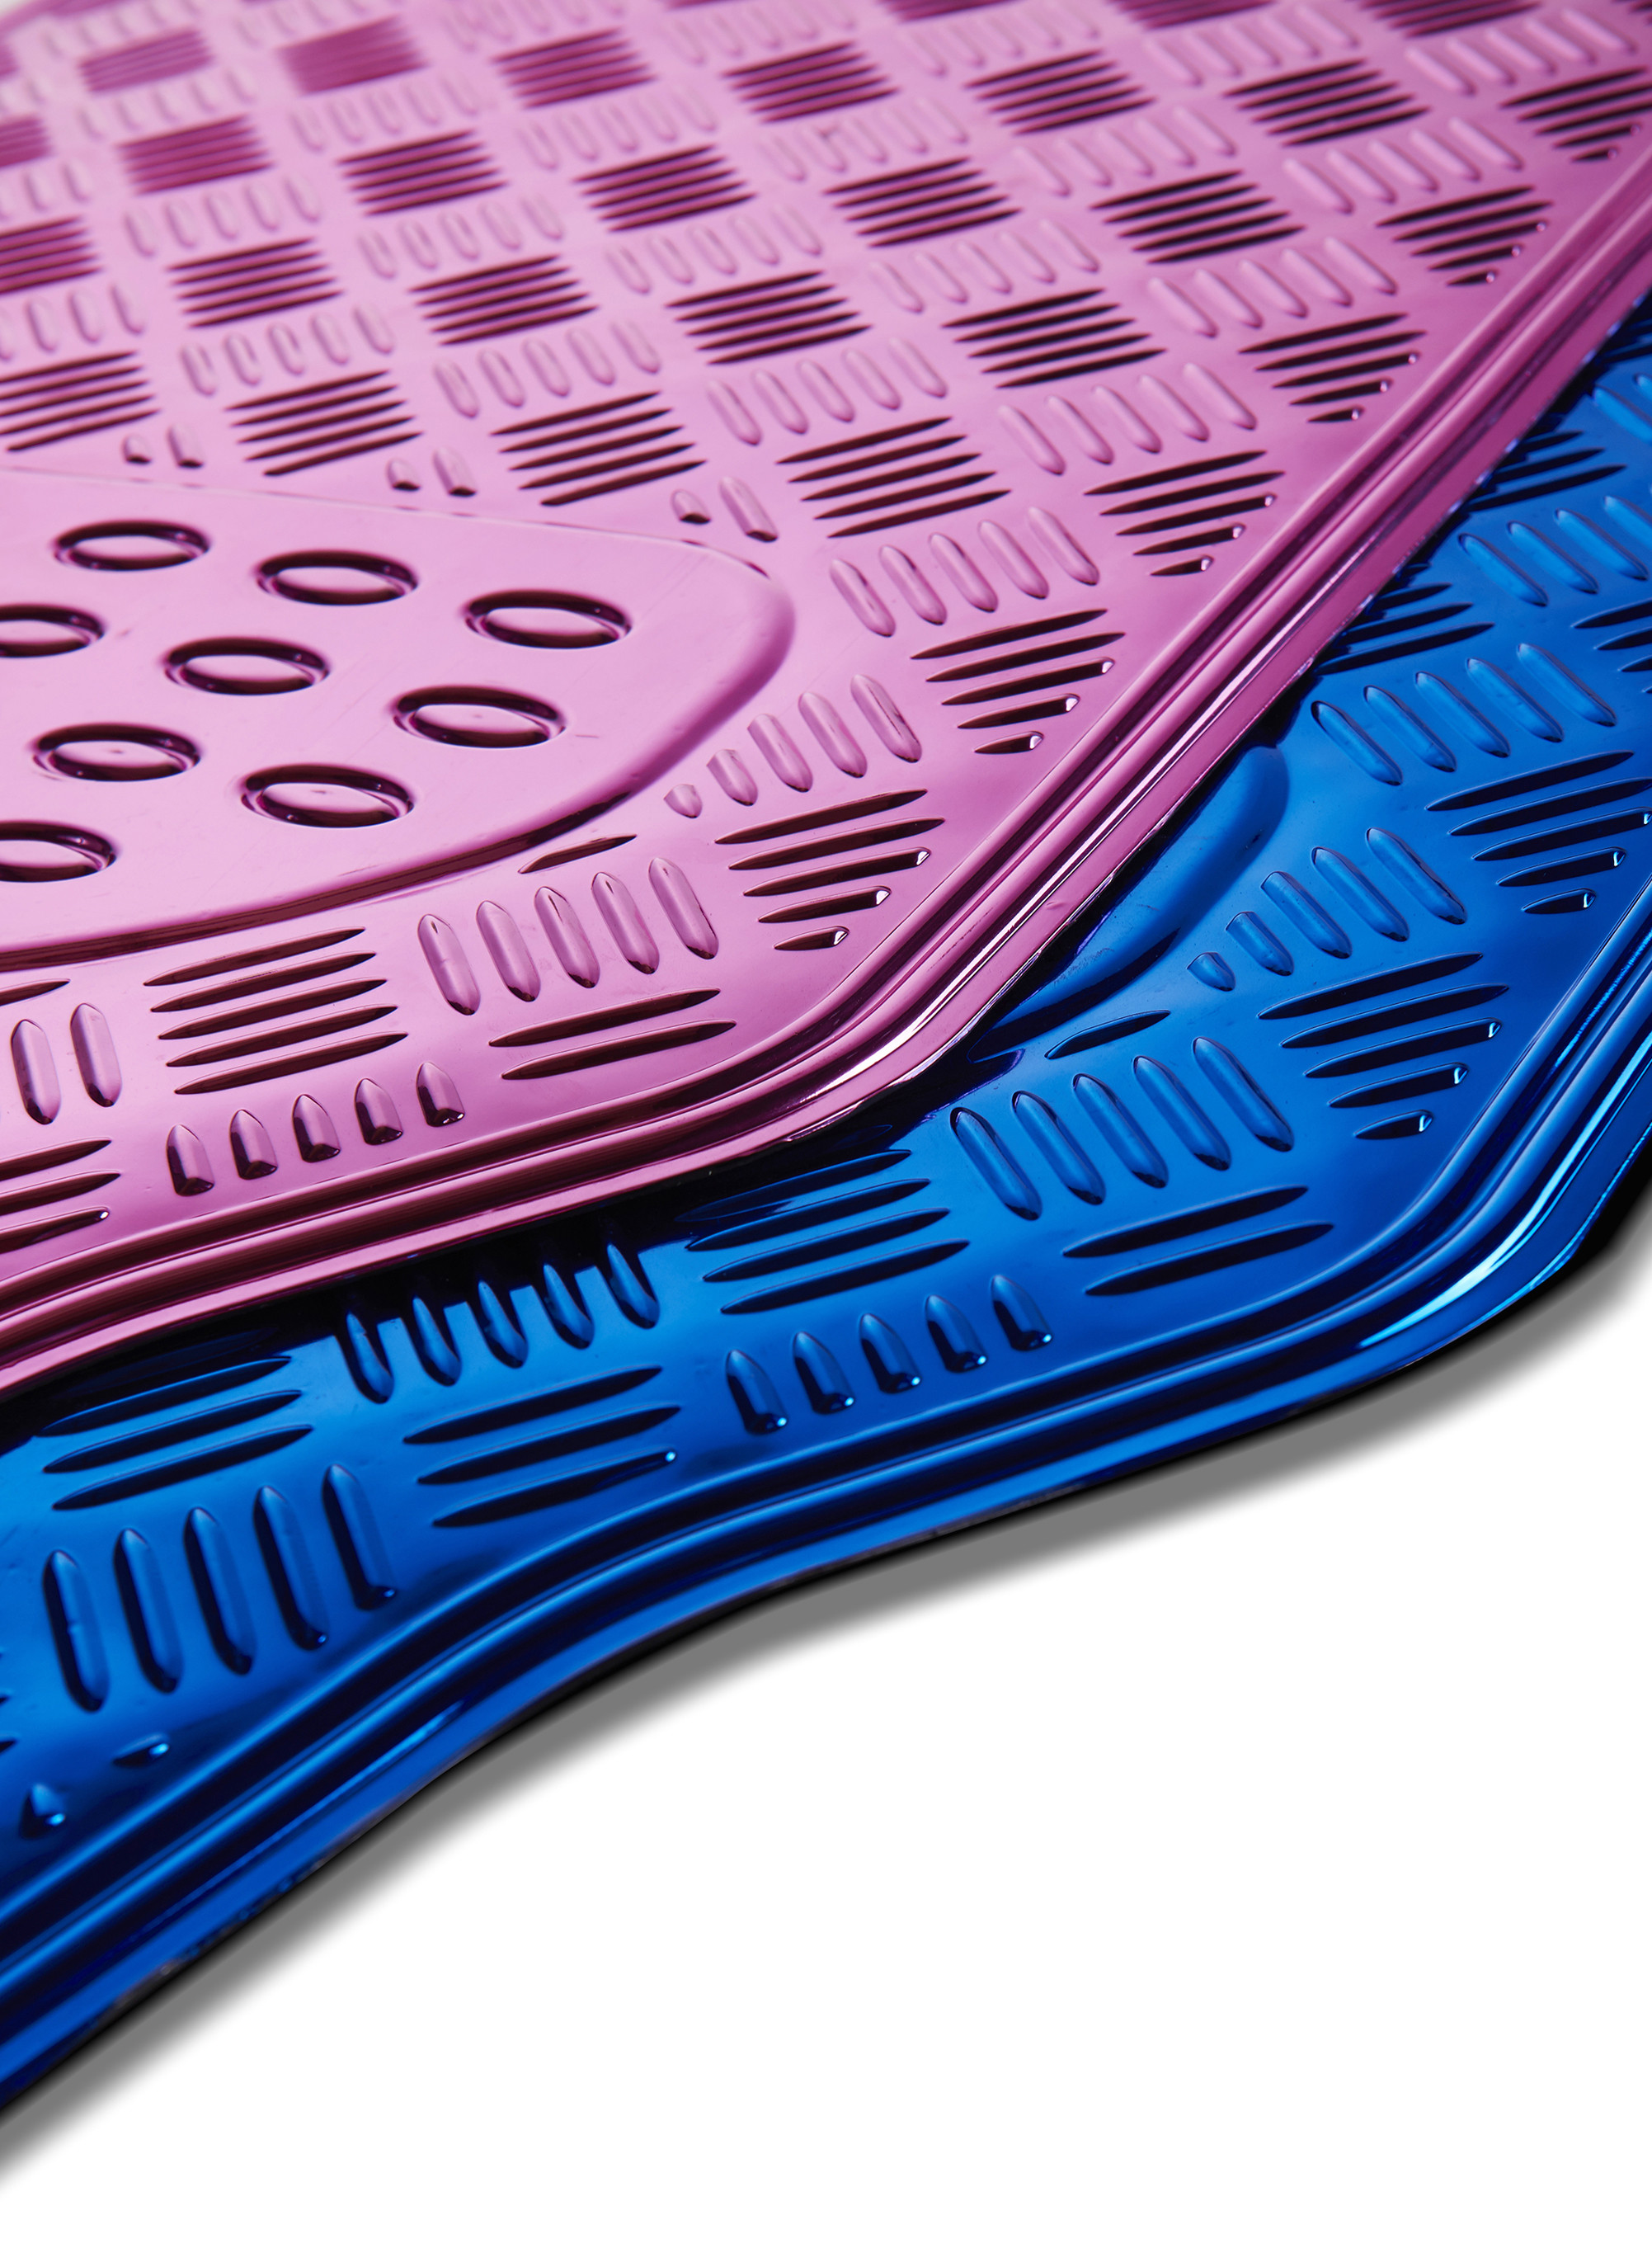 6 Reasons to Upgrade to Rubber Floor Mats This Winter